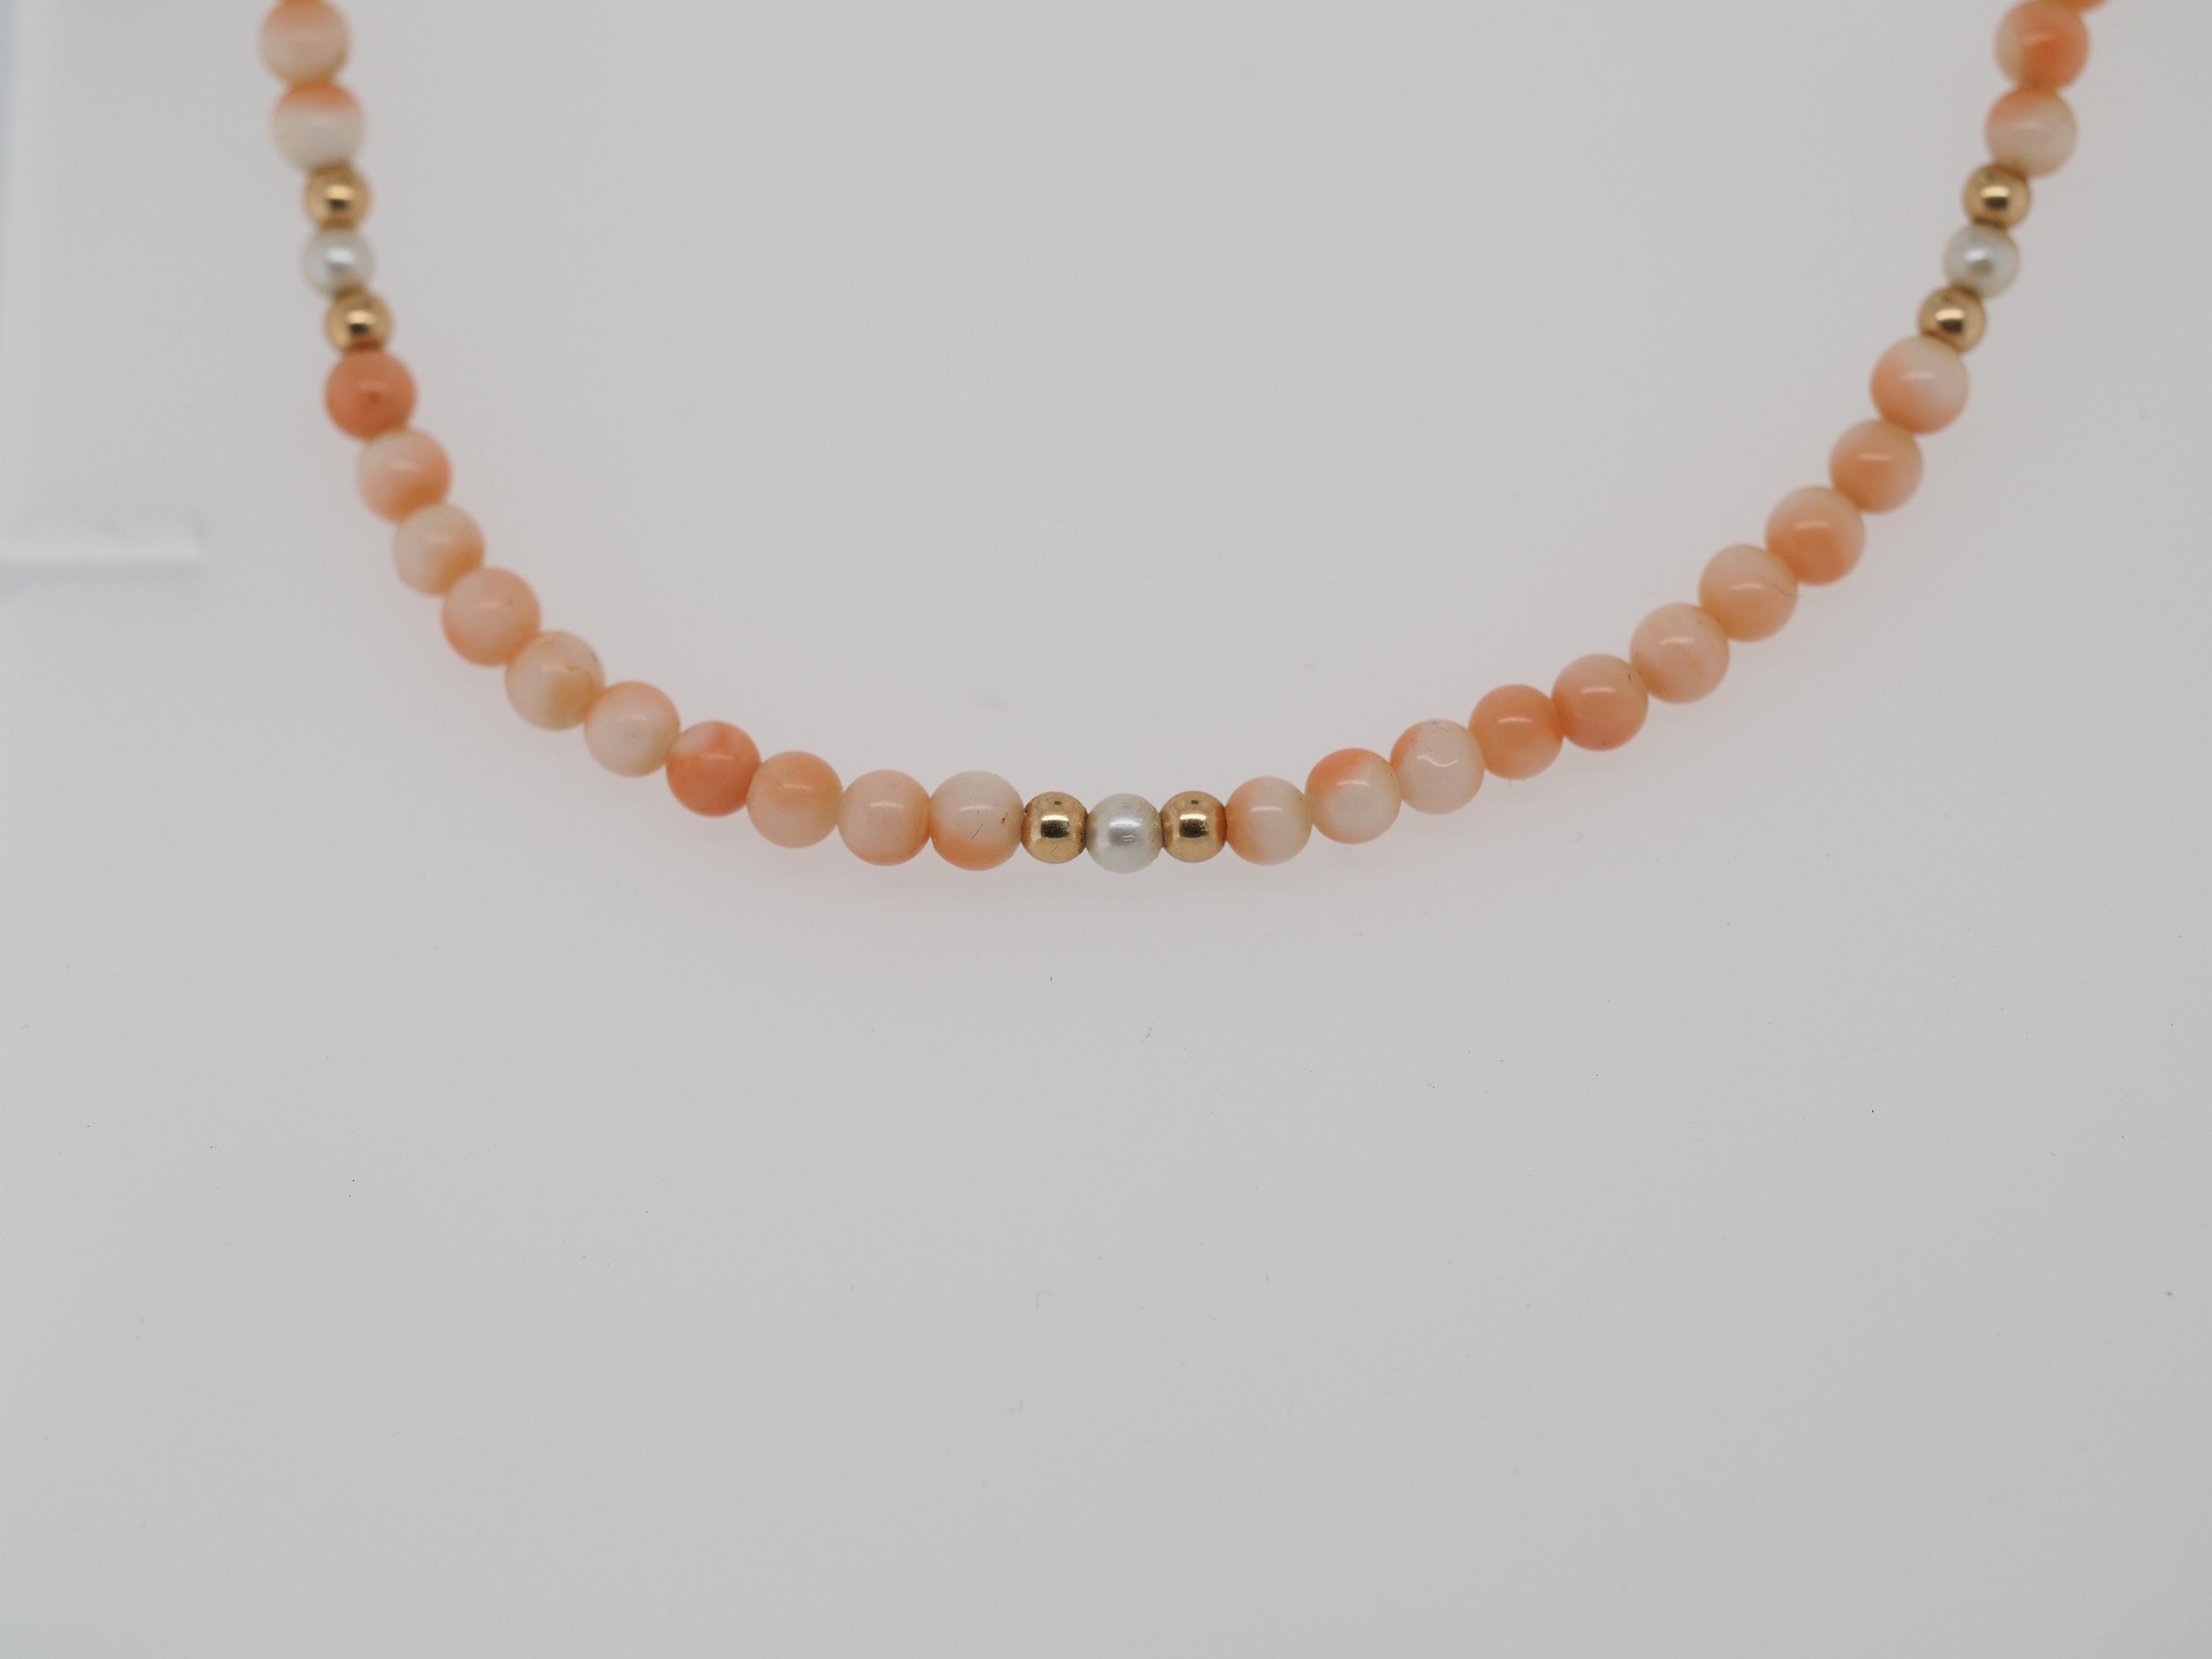 Item Details:
Metal Type: 14K Yellow Gold [Hallmarked, and Tested]
Weight: 11.5 grams
Coral Details:
Cut: Round
Measurement: 4.1mm
Color: Pink & White
Necklace Measurement: 21.0 Inches
Condition: Excellent